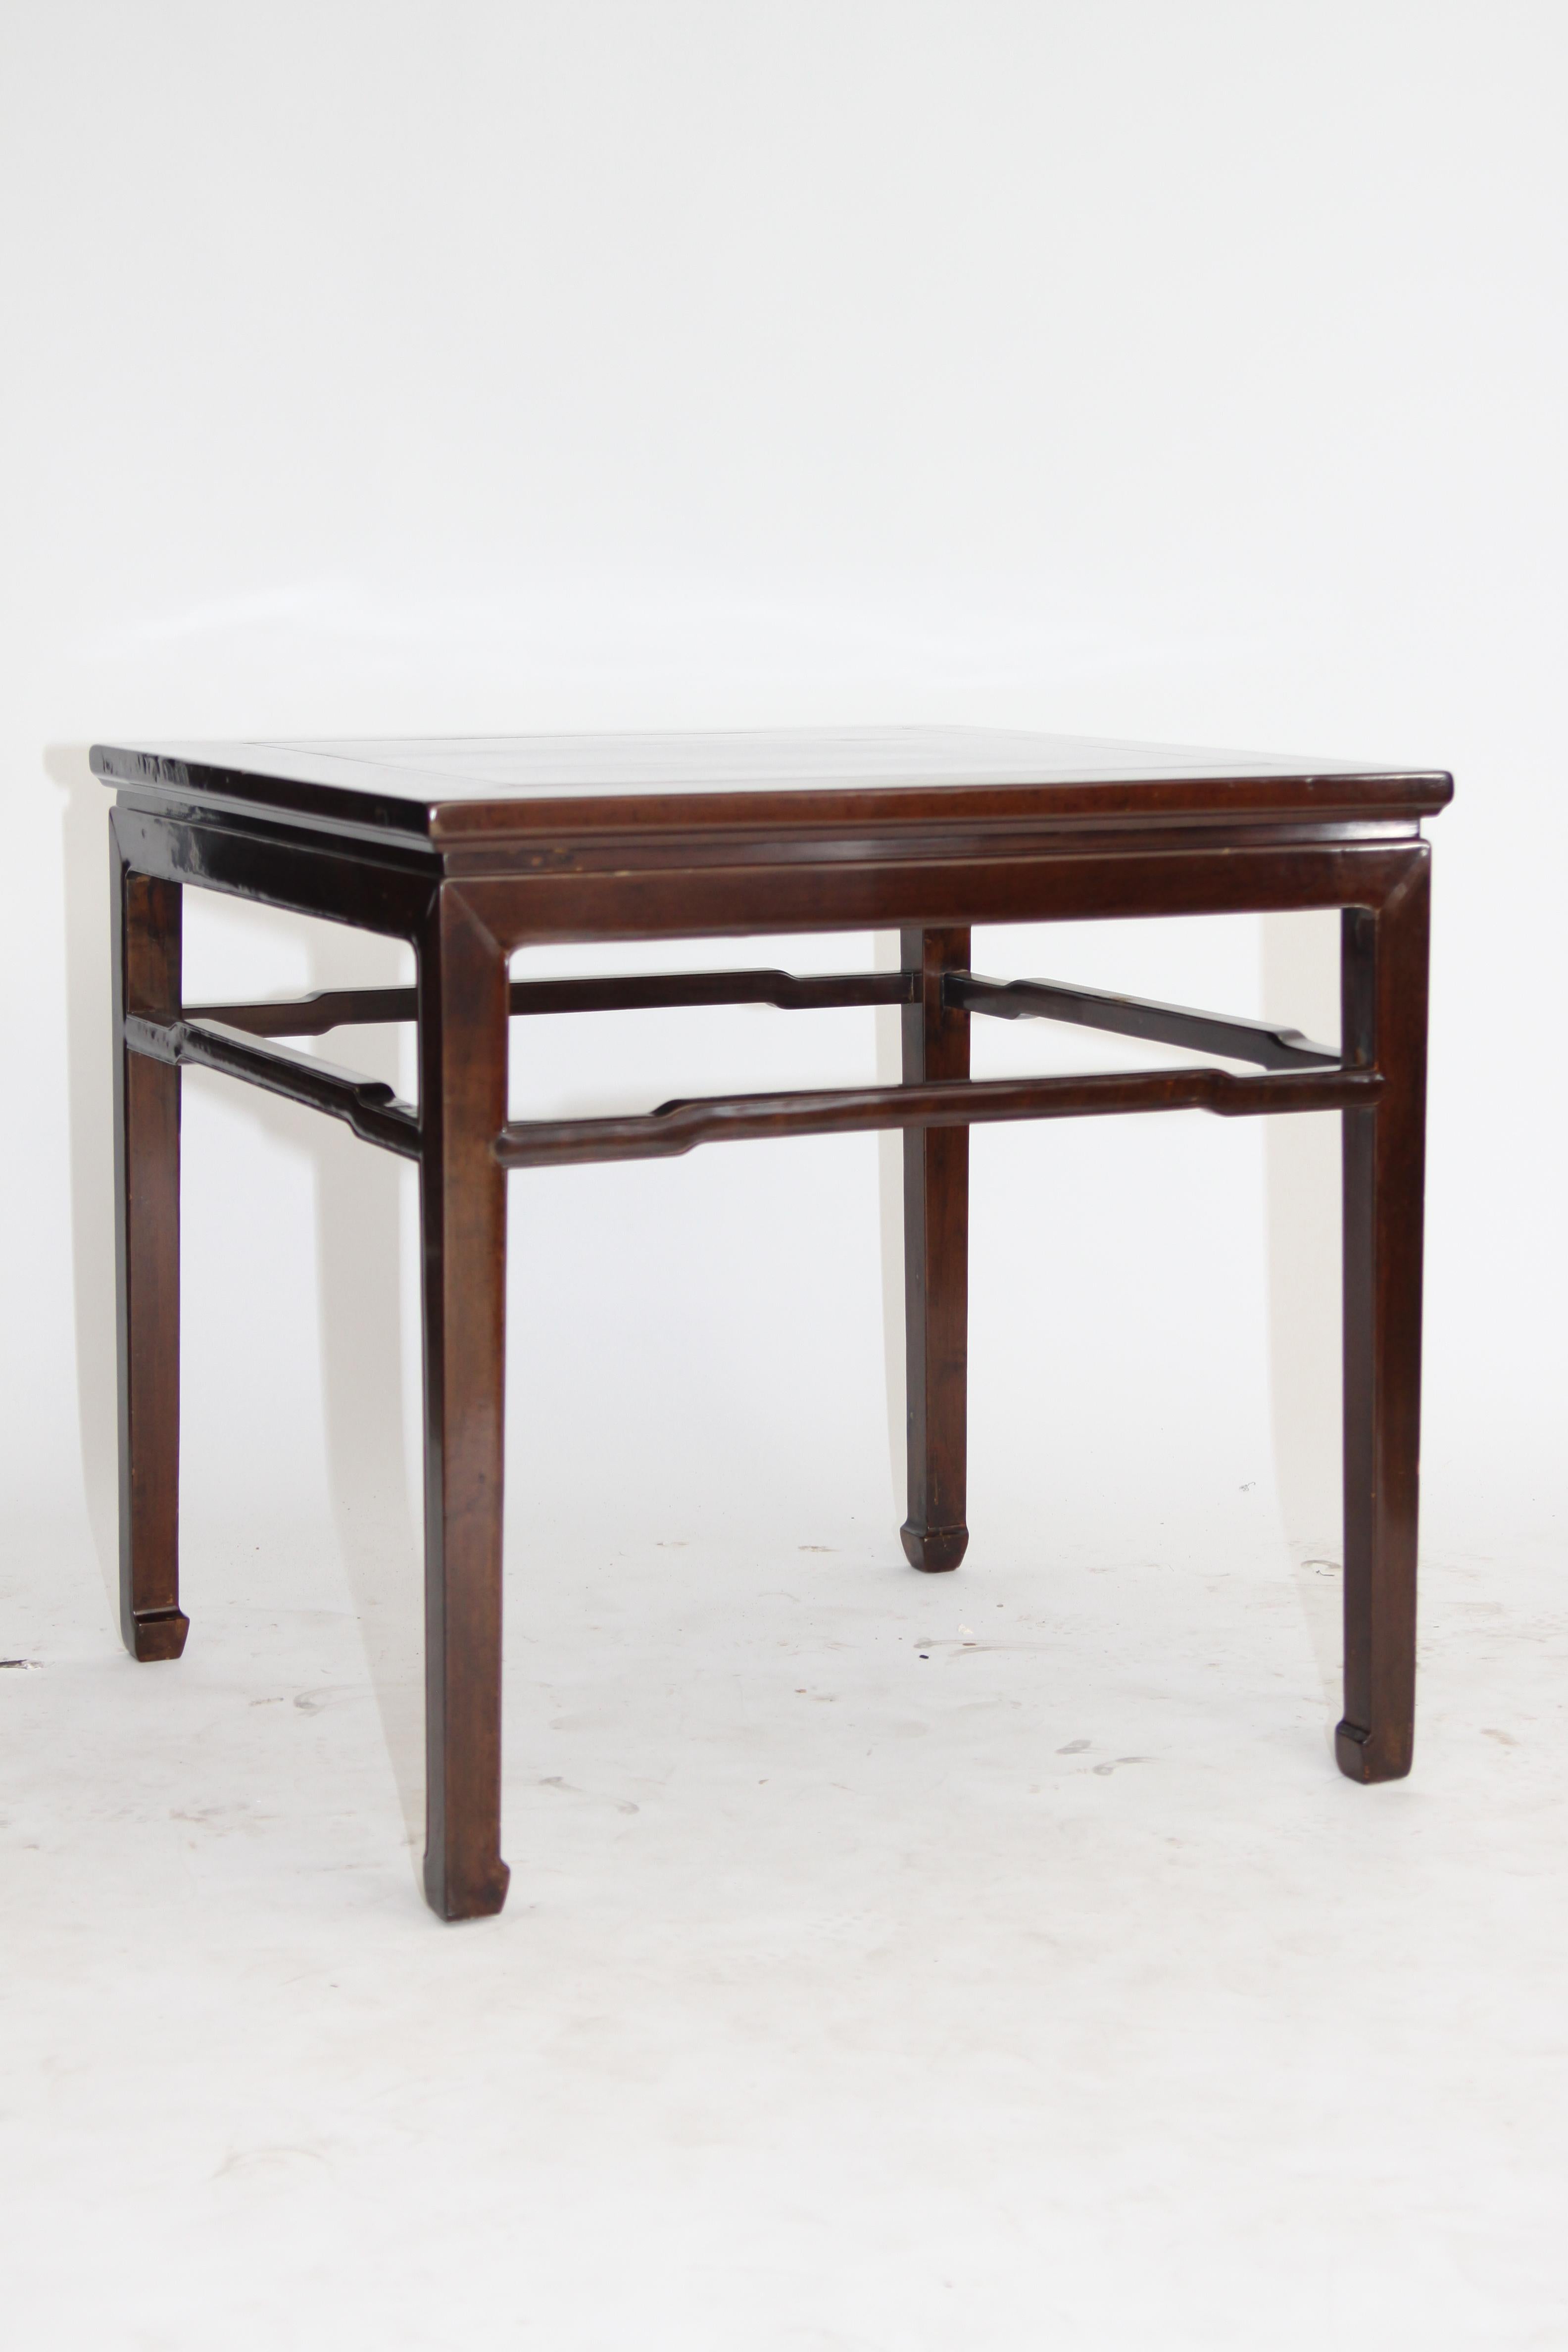 FINE SQUARE TABLE

The table with a floating top panel, enclosed within an ice-plate edged frame, above a waist and plain apron, supported on square-sectioned legs, braced with humpback stretchers, the legs tapering to end in horse hoof